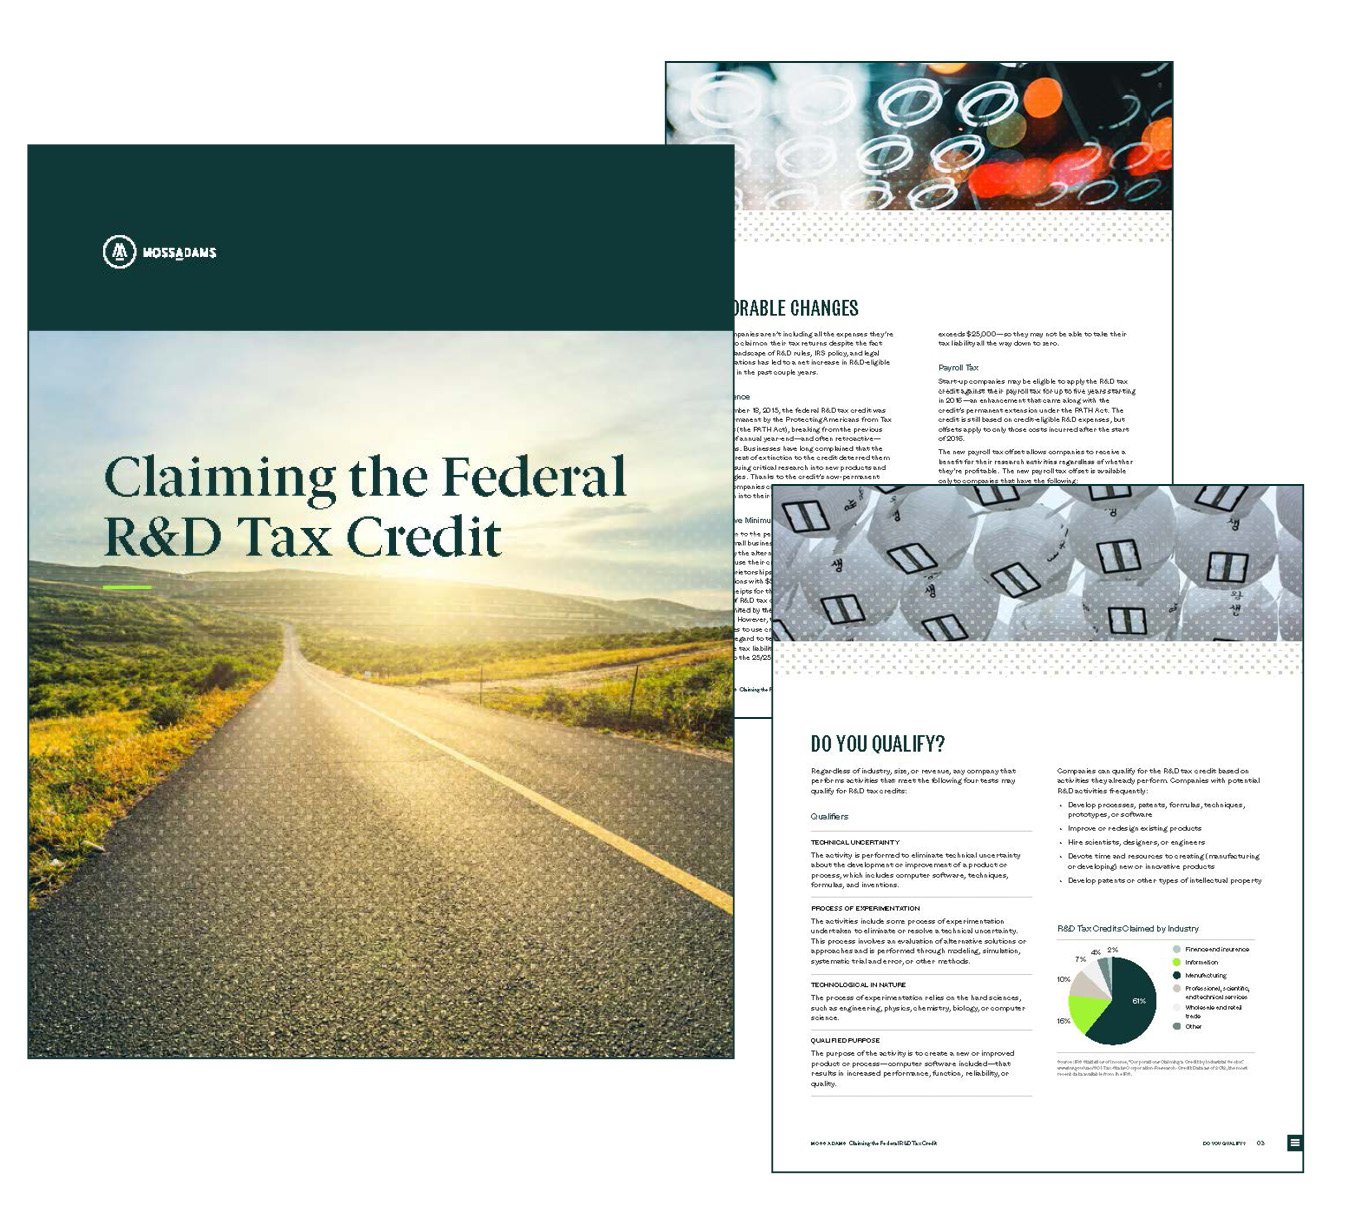 The Federal R&D Tax Credit